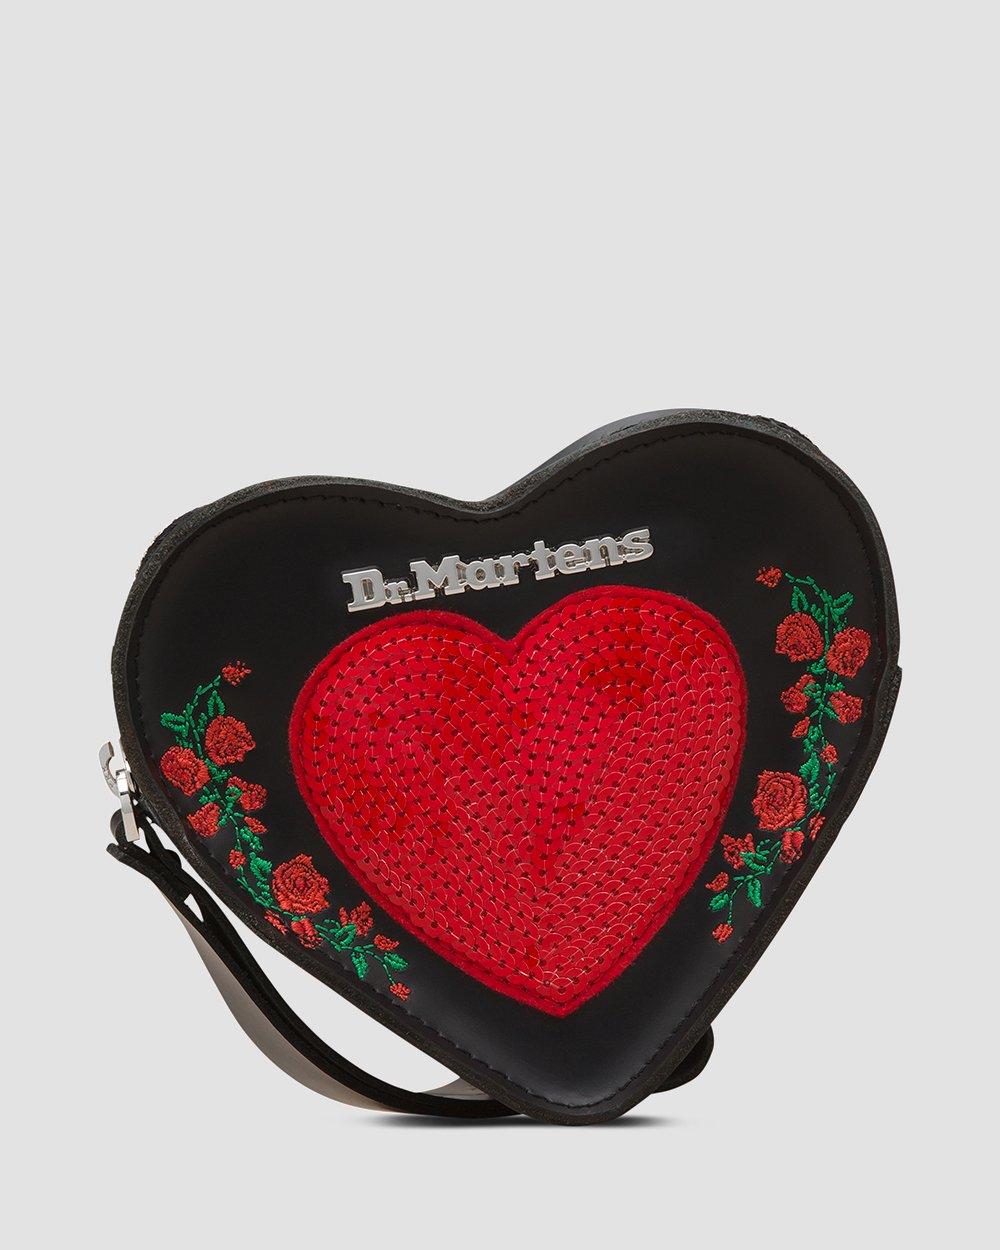 Dr.Martens Valentine's Day Heart Purse Genuine Leather Pouch Wallet